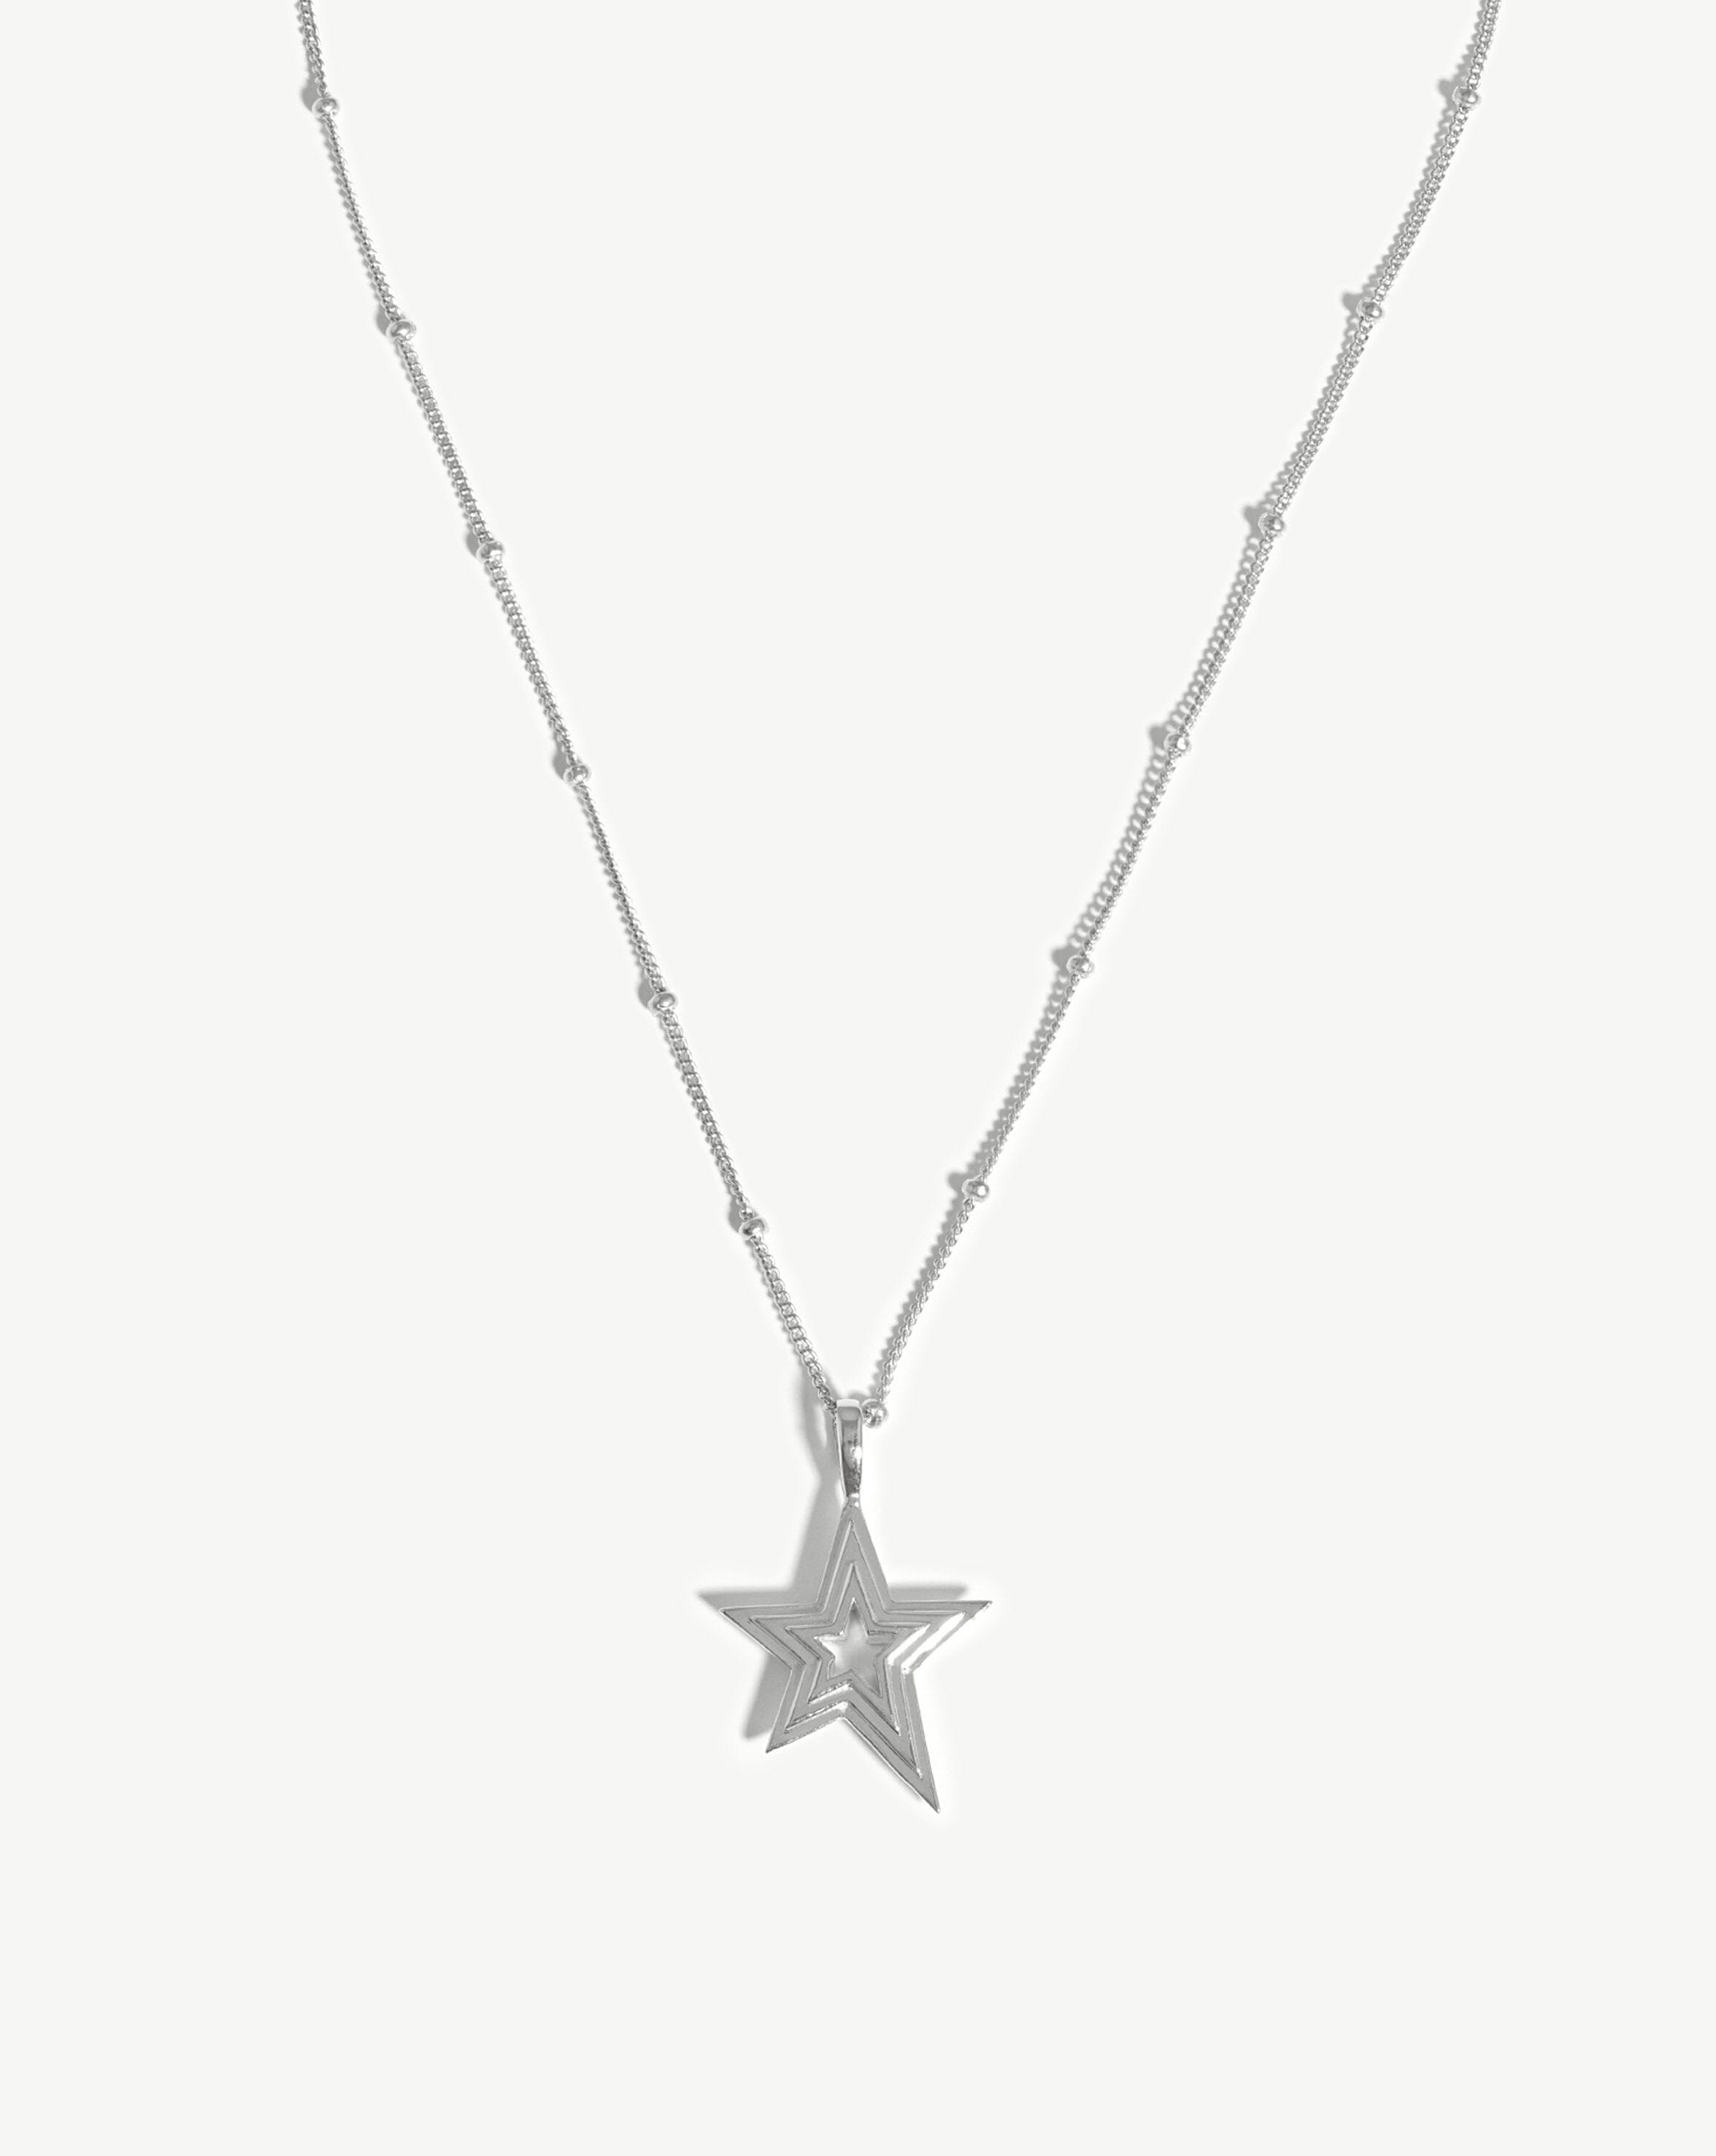 Celestial Star Ridge Pendant Necklace | Sterling Silver Necklaces Missoma 